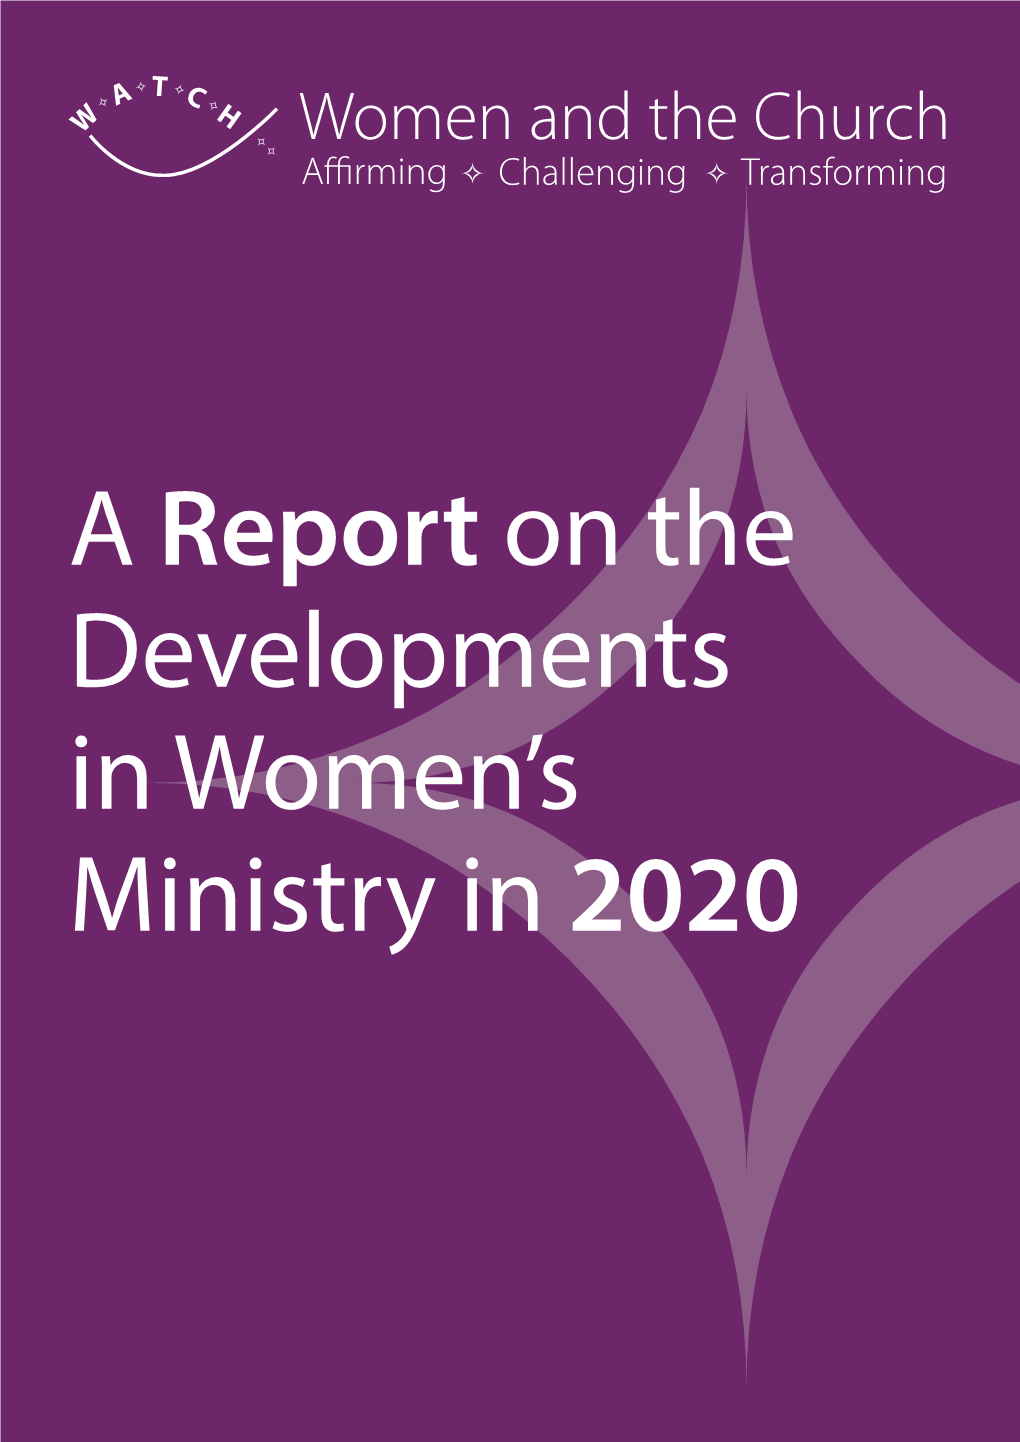 A Report on the Developments in Women's Ministry in 2020